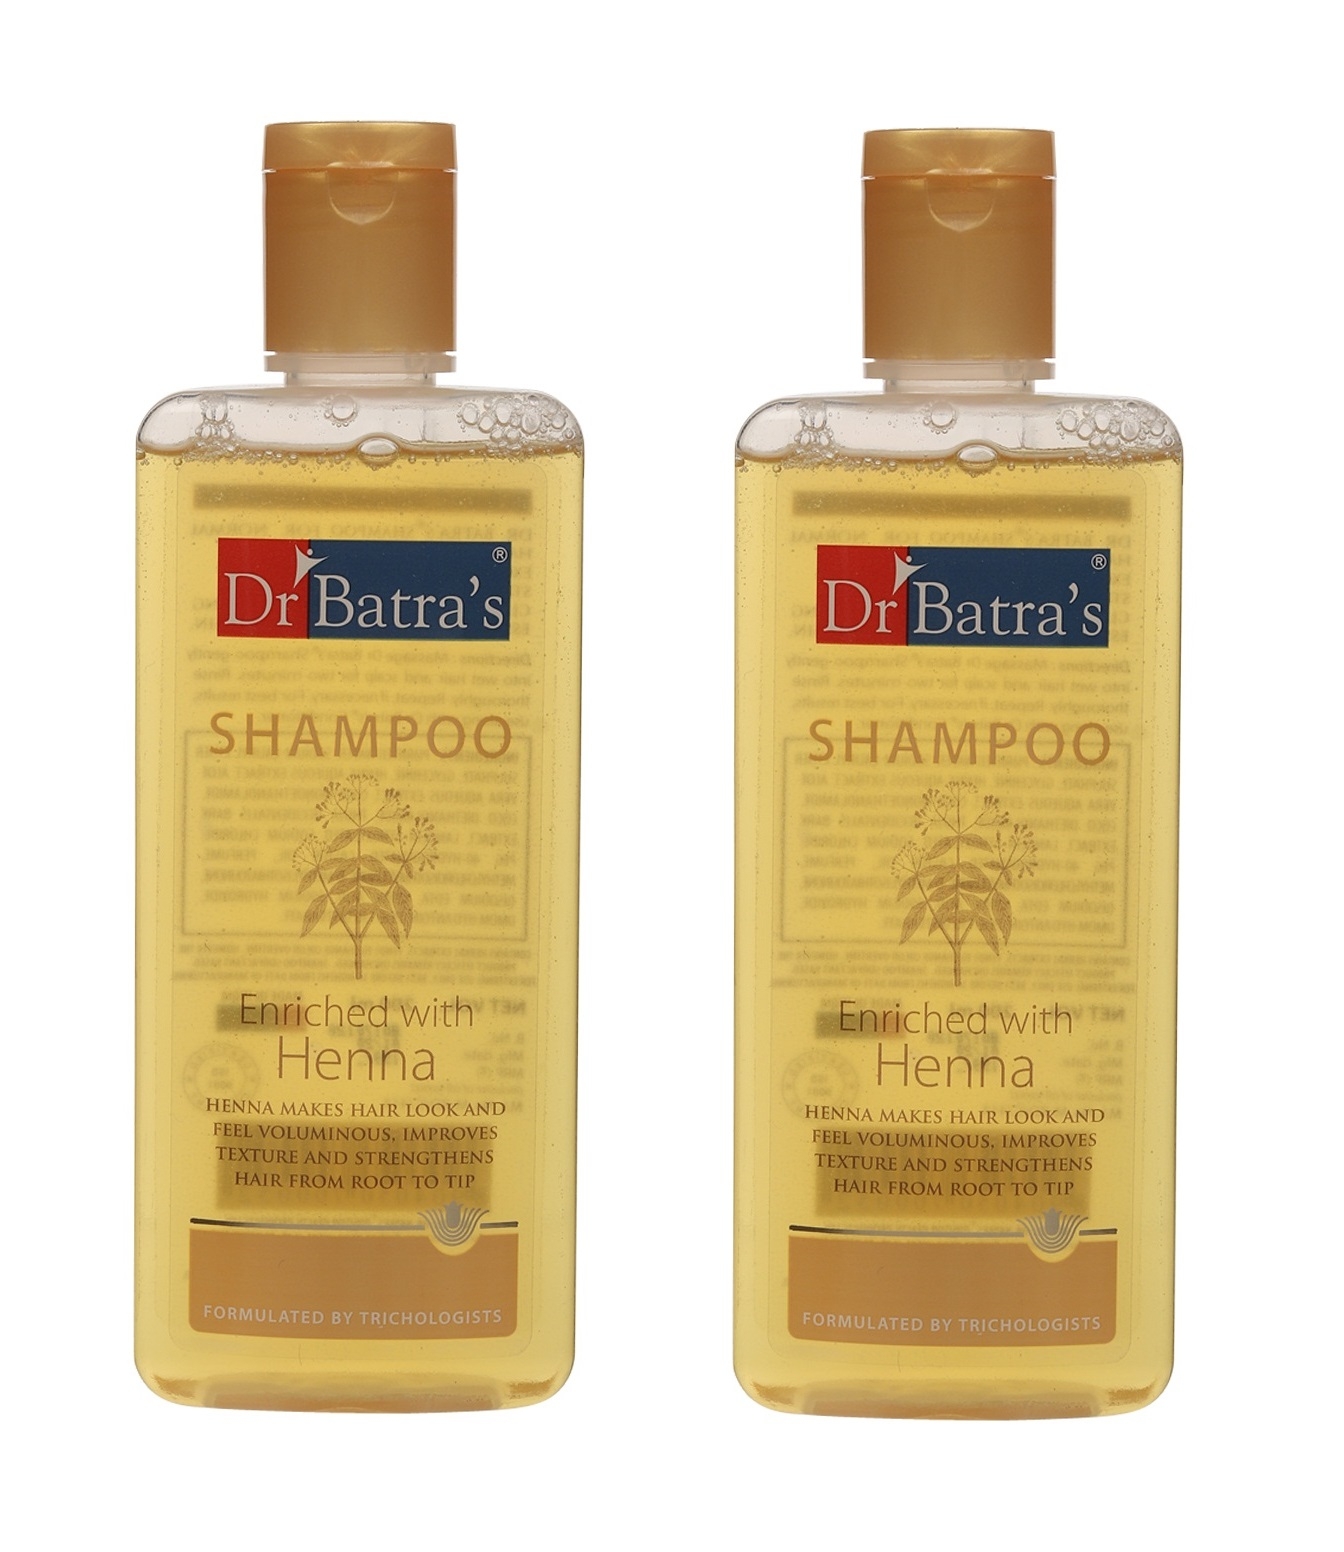 Dr Batra's | Dr Batra's Shampoo Enriched With Henna - 200 ml (Pack of 2)